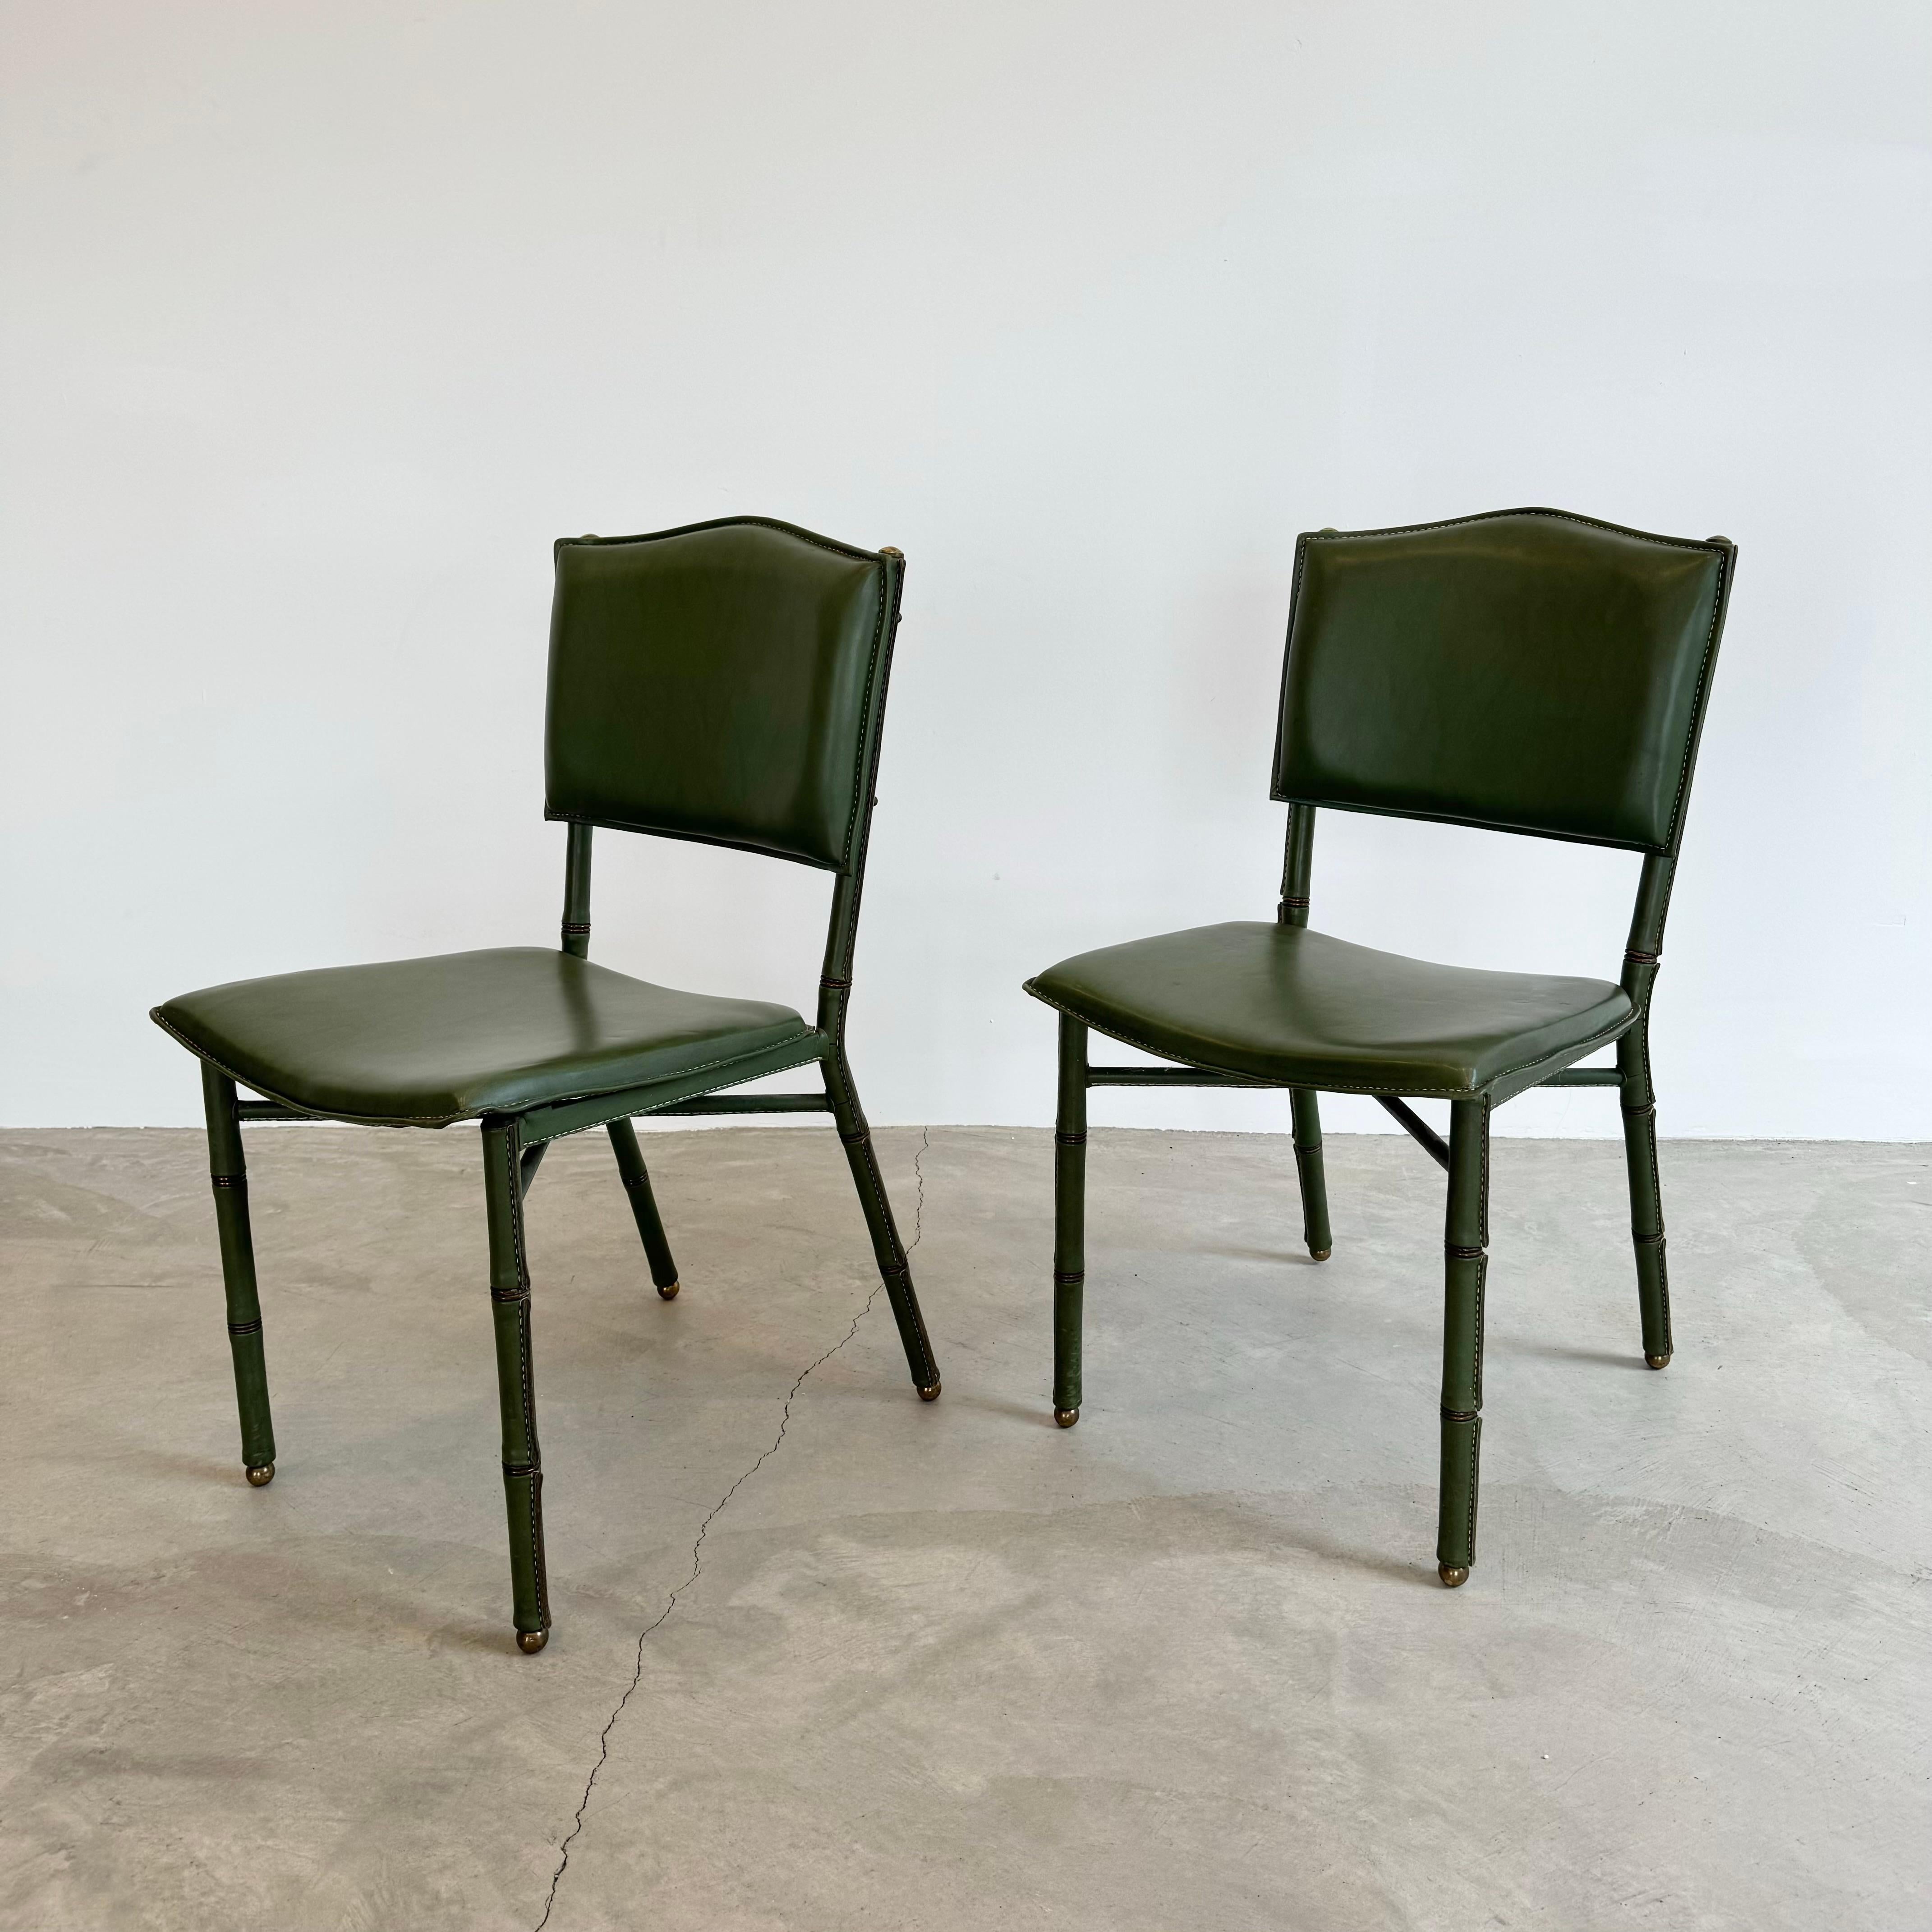 Pair of rare chairs by French architect and Art Deco Modernist designer and icon of luxurious French Modernism, Jacques Adnet, circa 1950s. Each chair upholstered in sumptuous green leather. Brass and leather bamboo signature detailing with